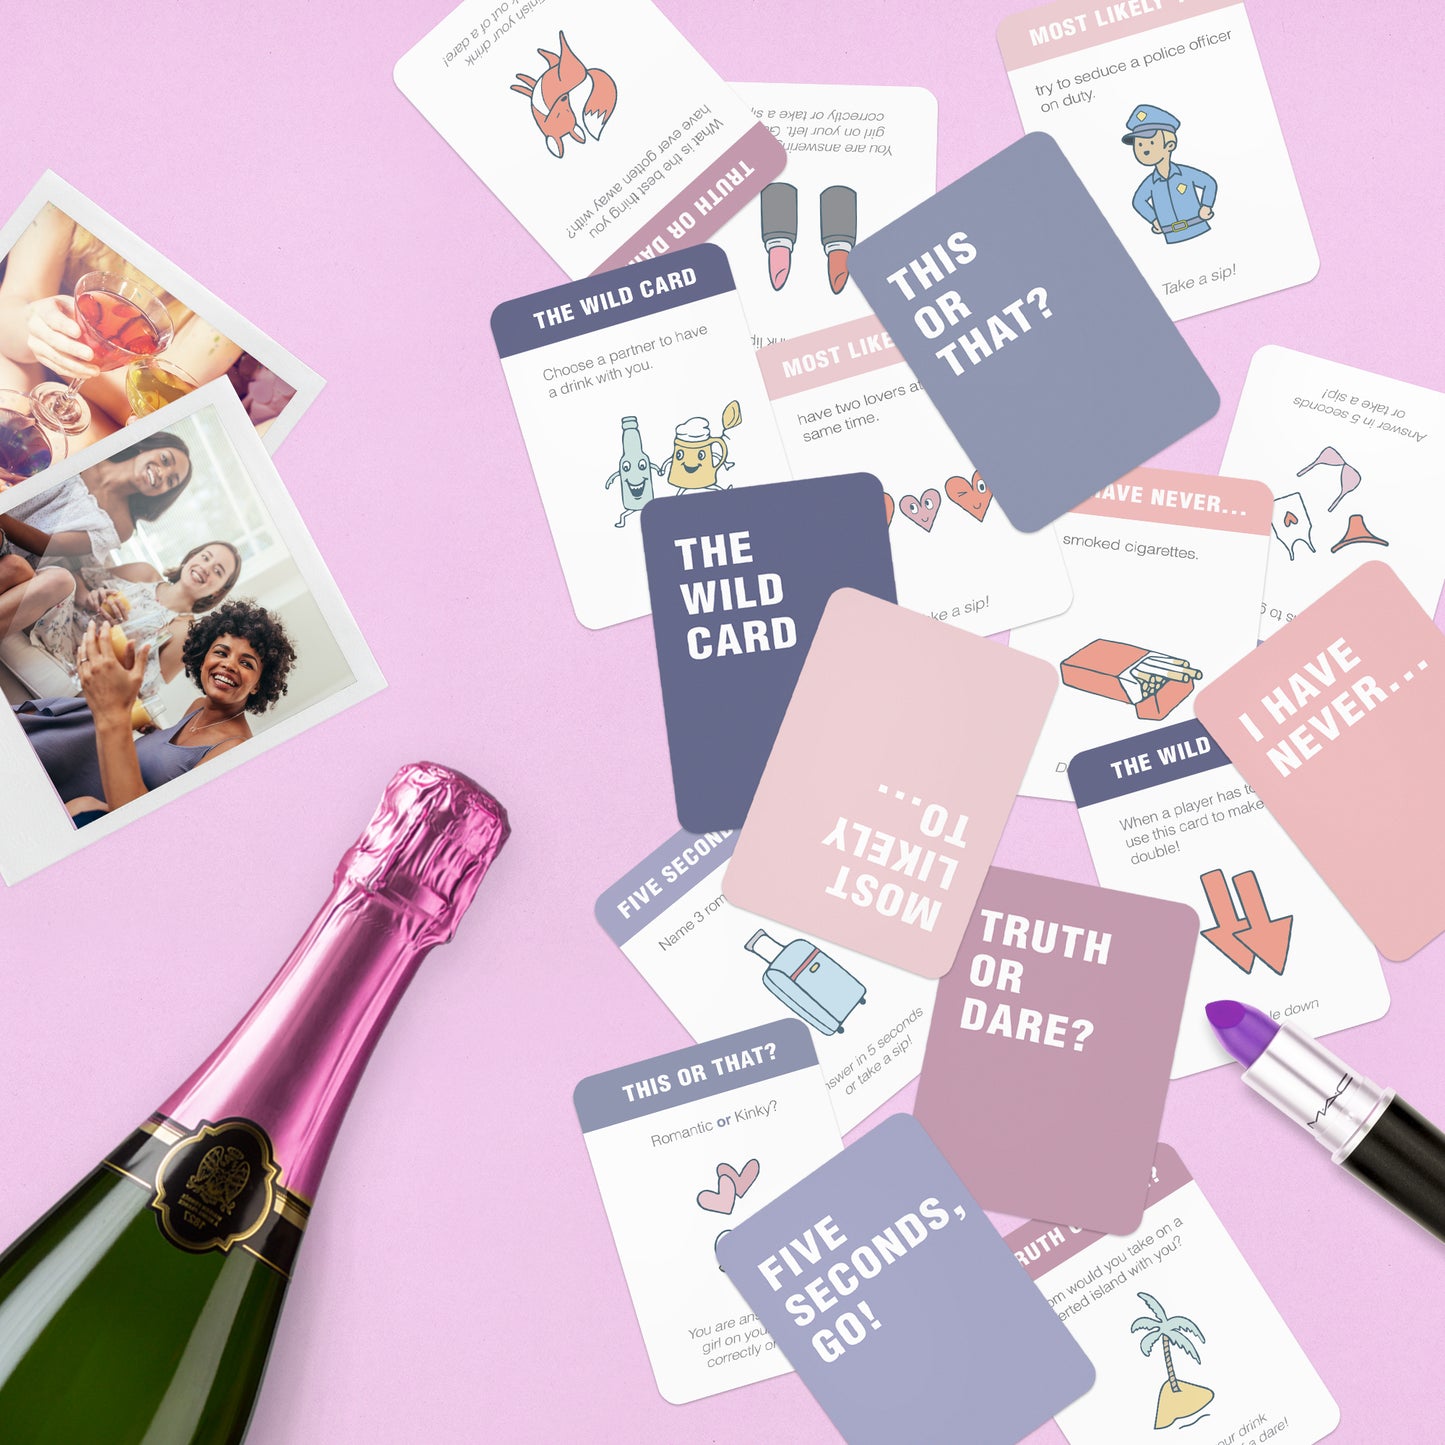 BUBBLY - Card Game for a Fun Time With Your Girlfriends